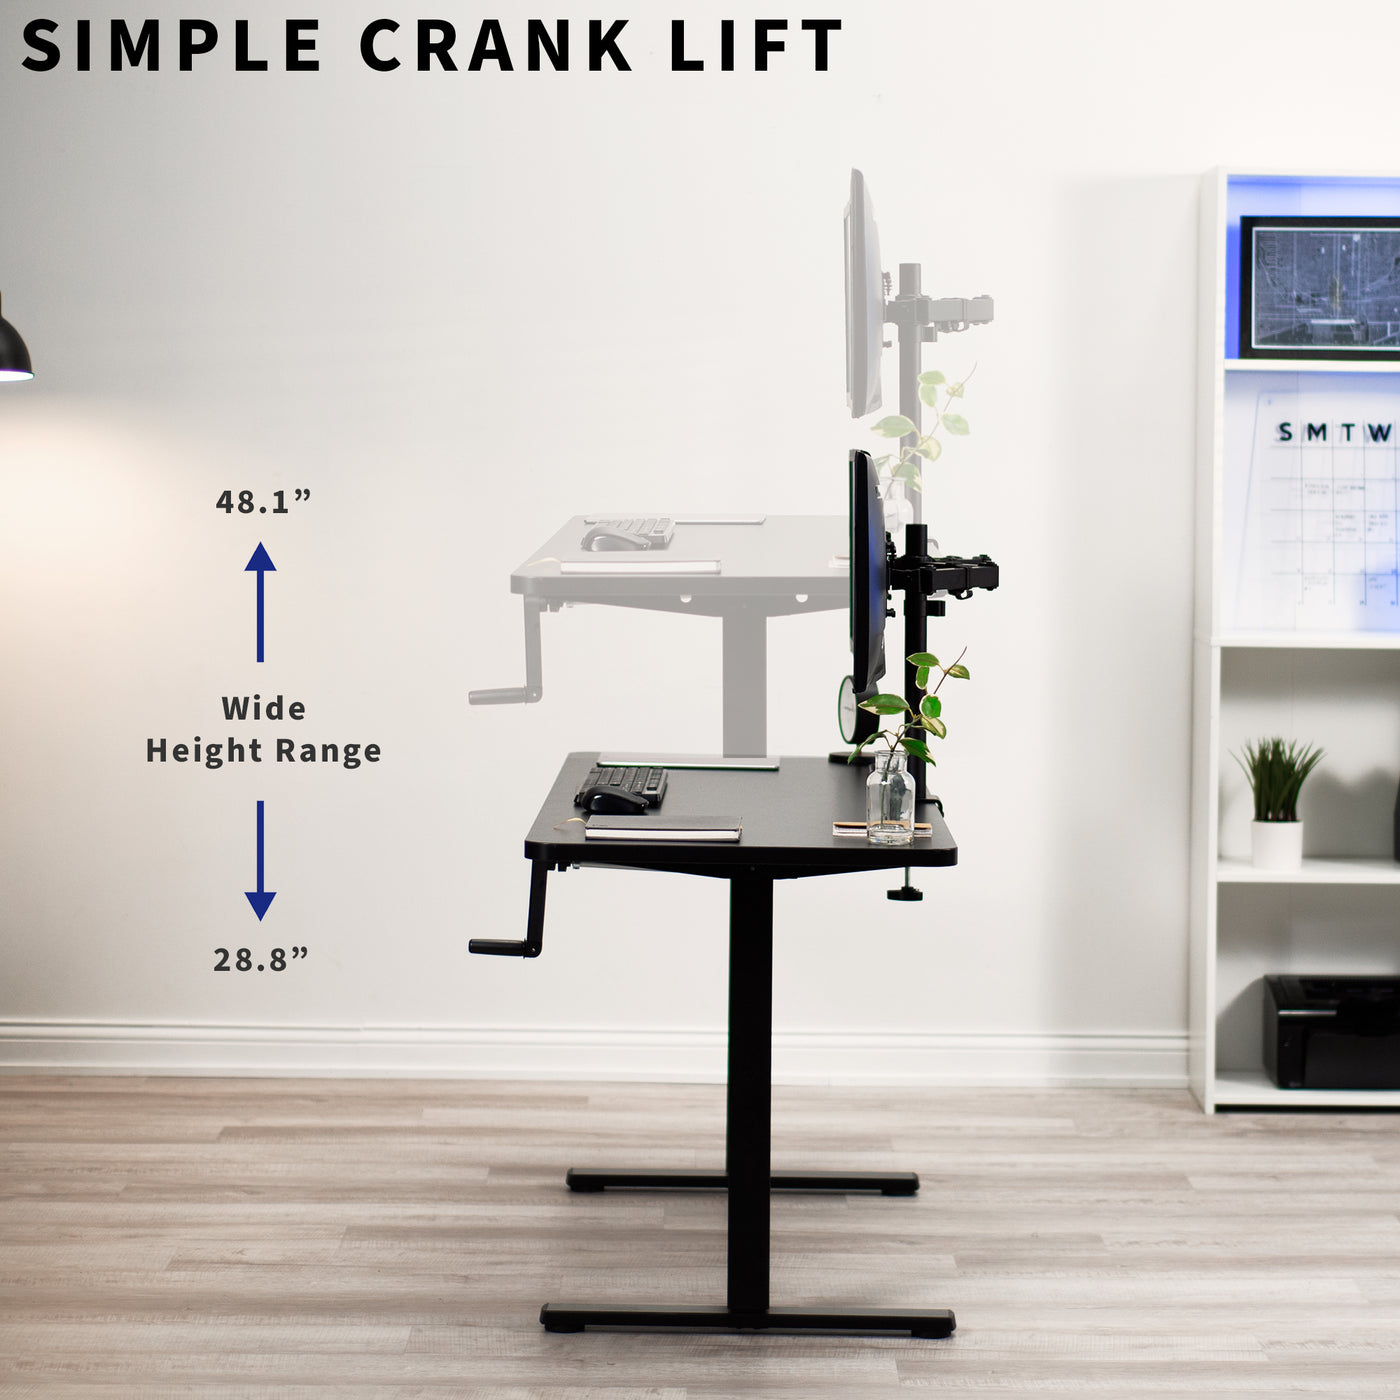 Wide height range to find the most comfortable working height while sitting or standing.